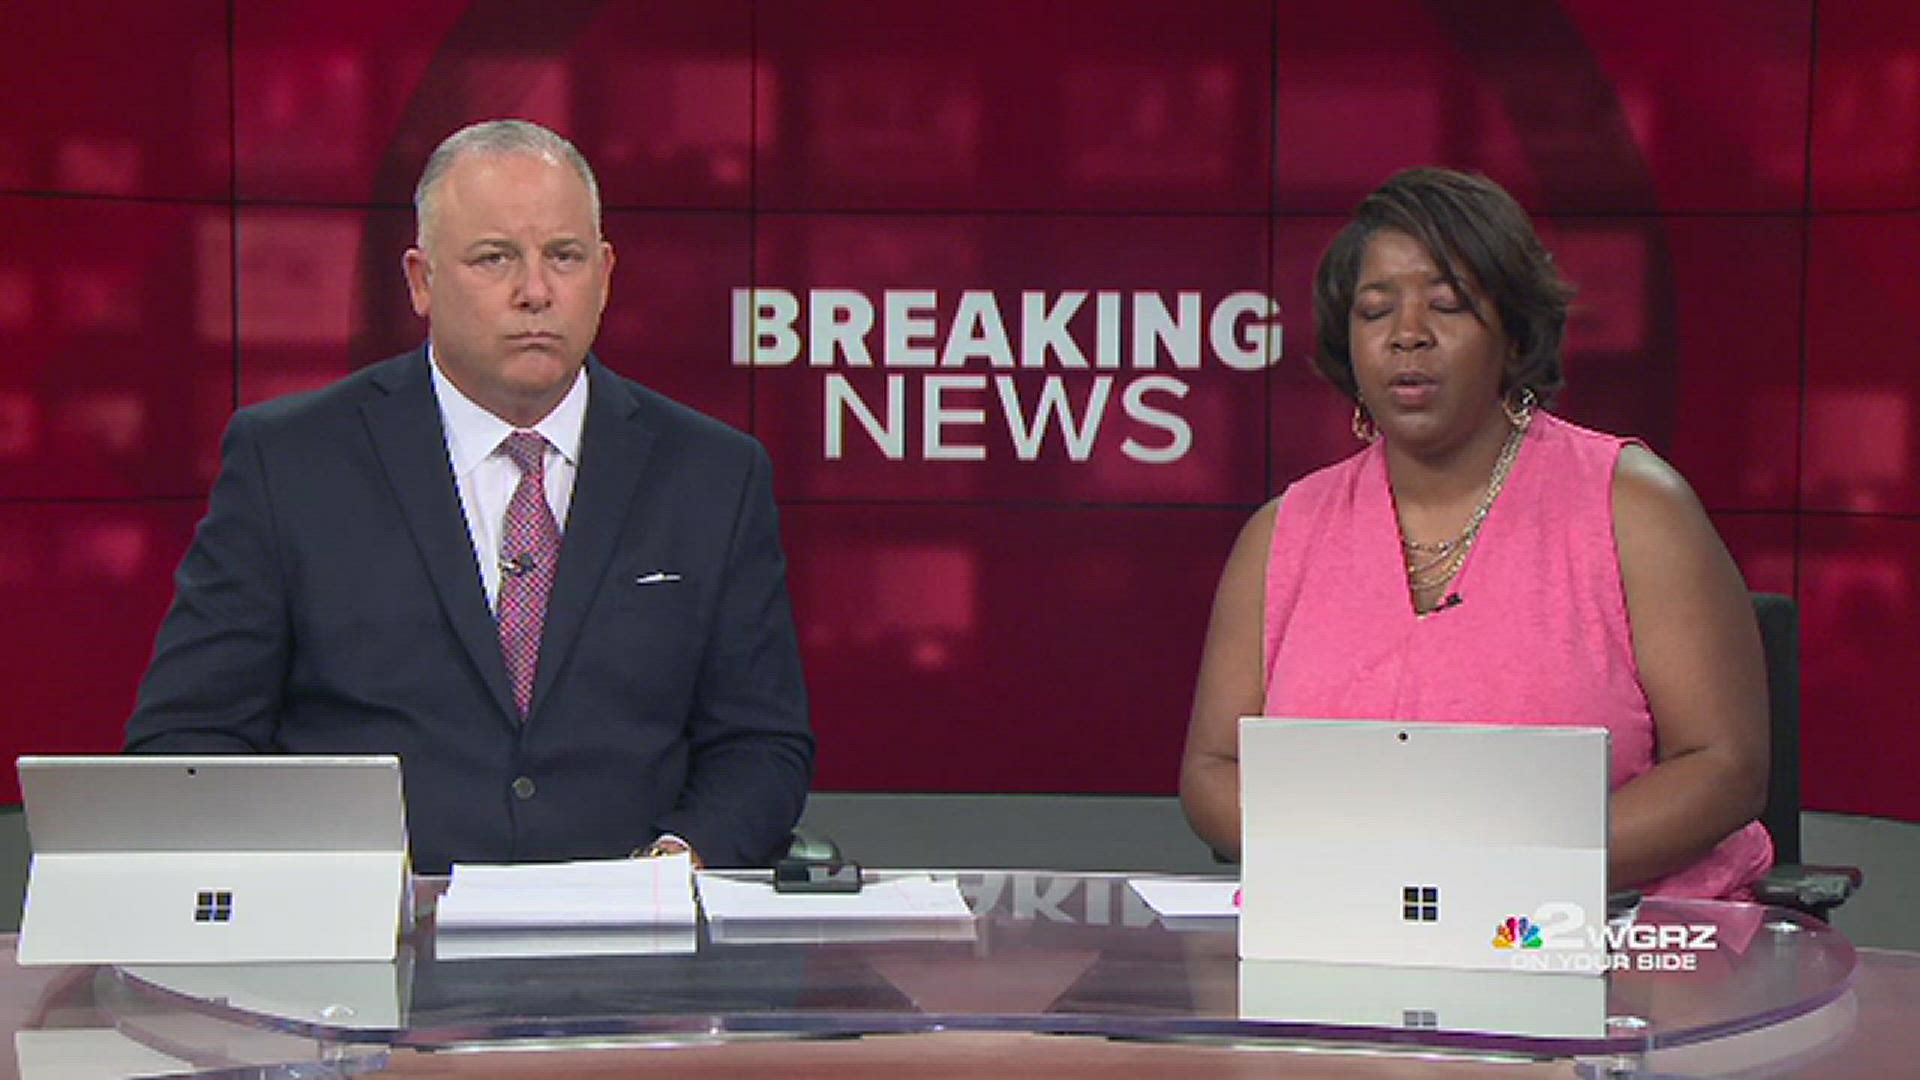 Latisha said she could hear gunshots that wouldn't stop and had the wherewithal to call 911 during 2 On Your Side's live coverage of the mass shooting on May 14.